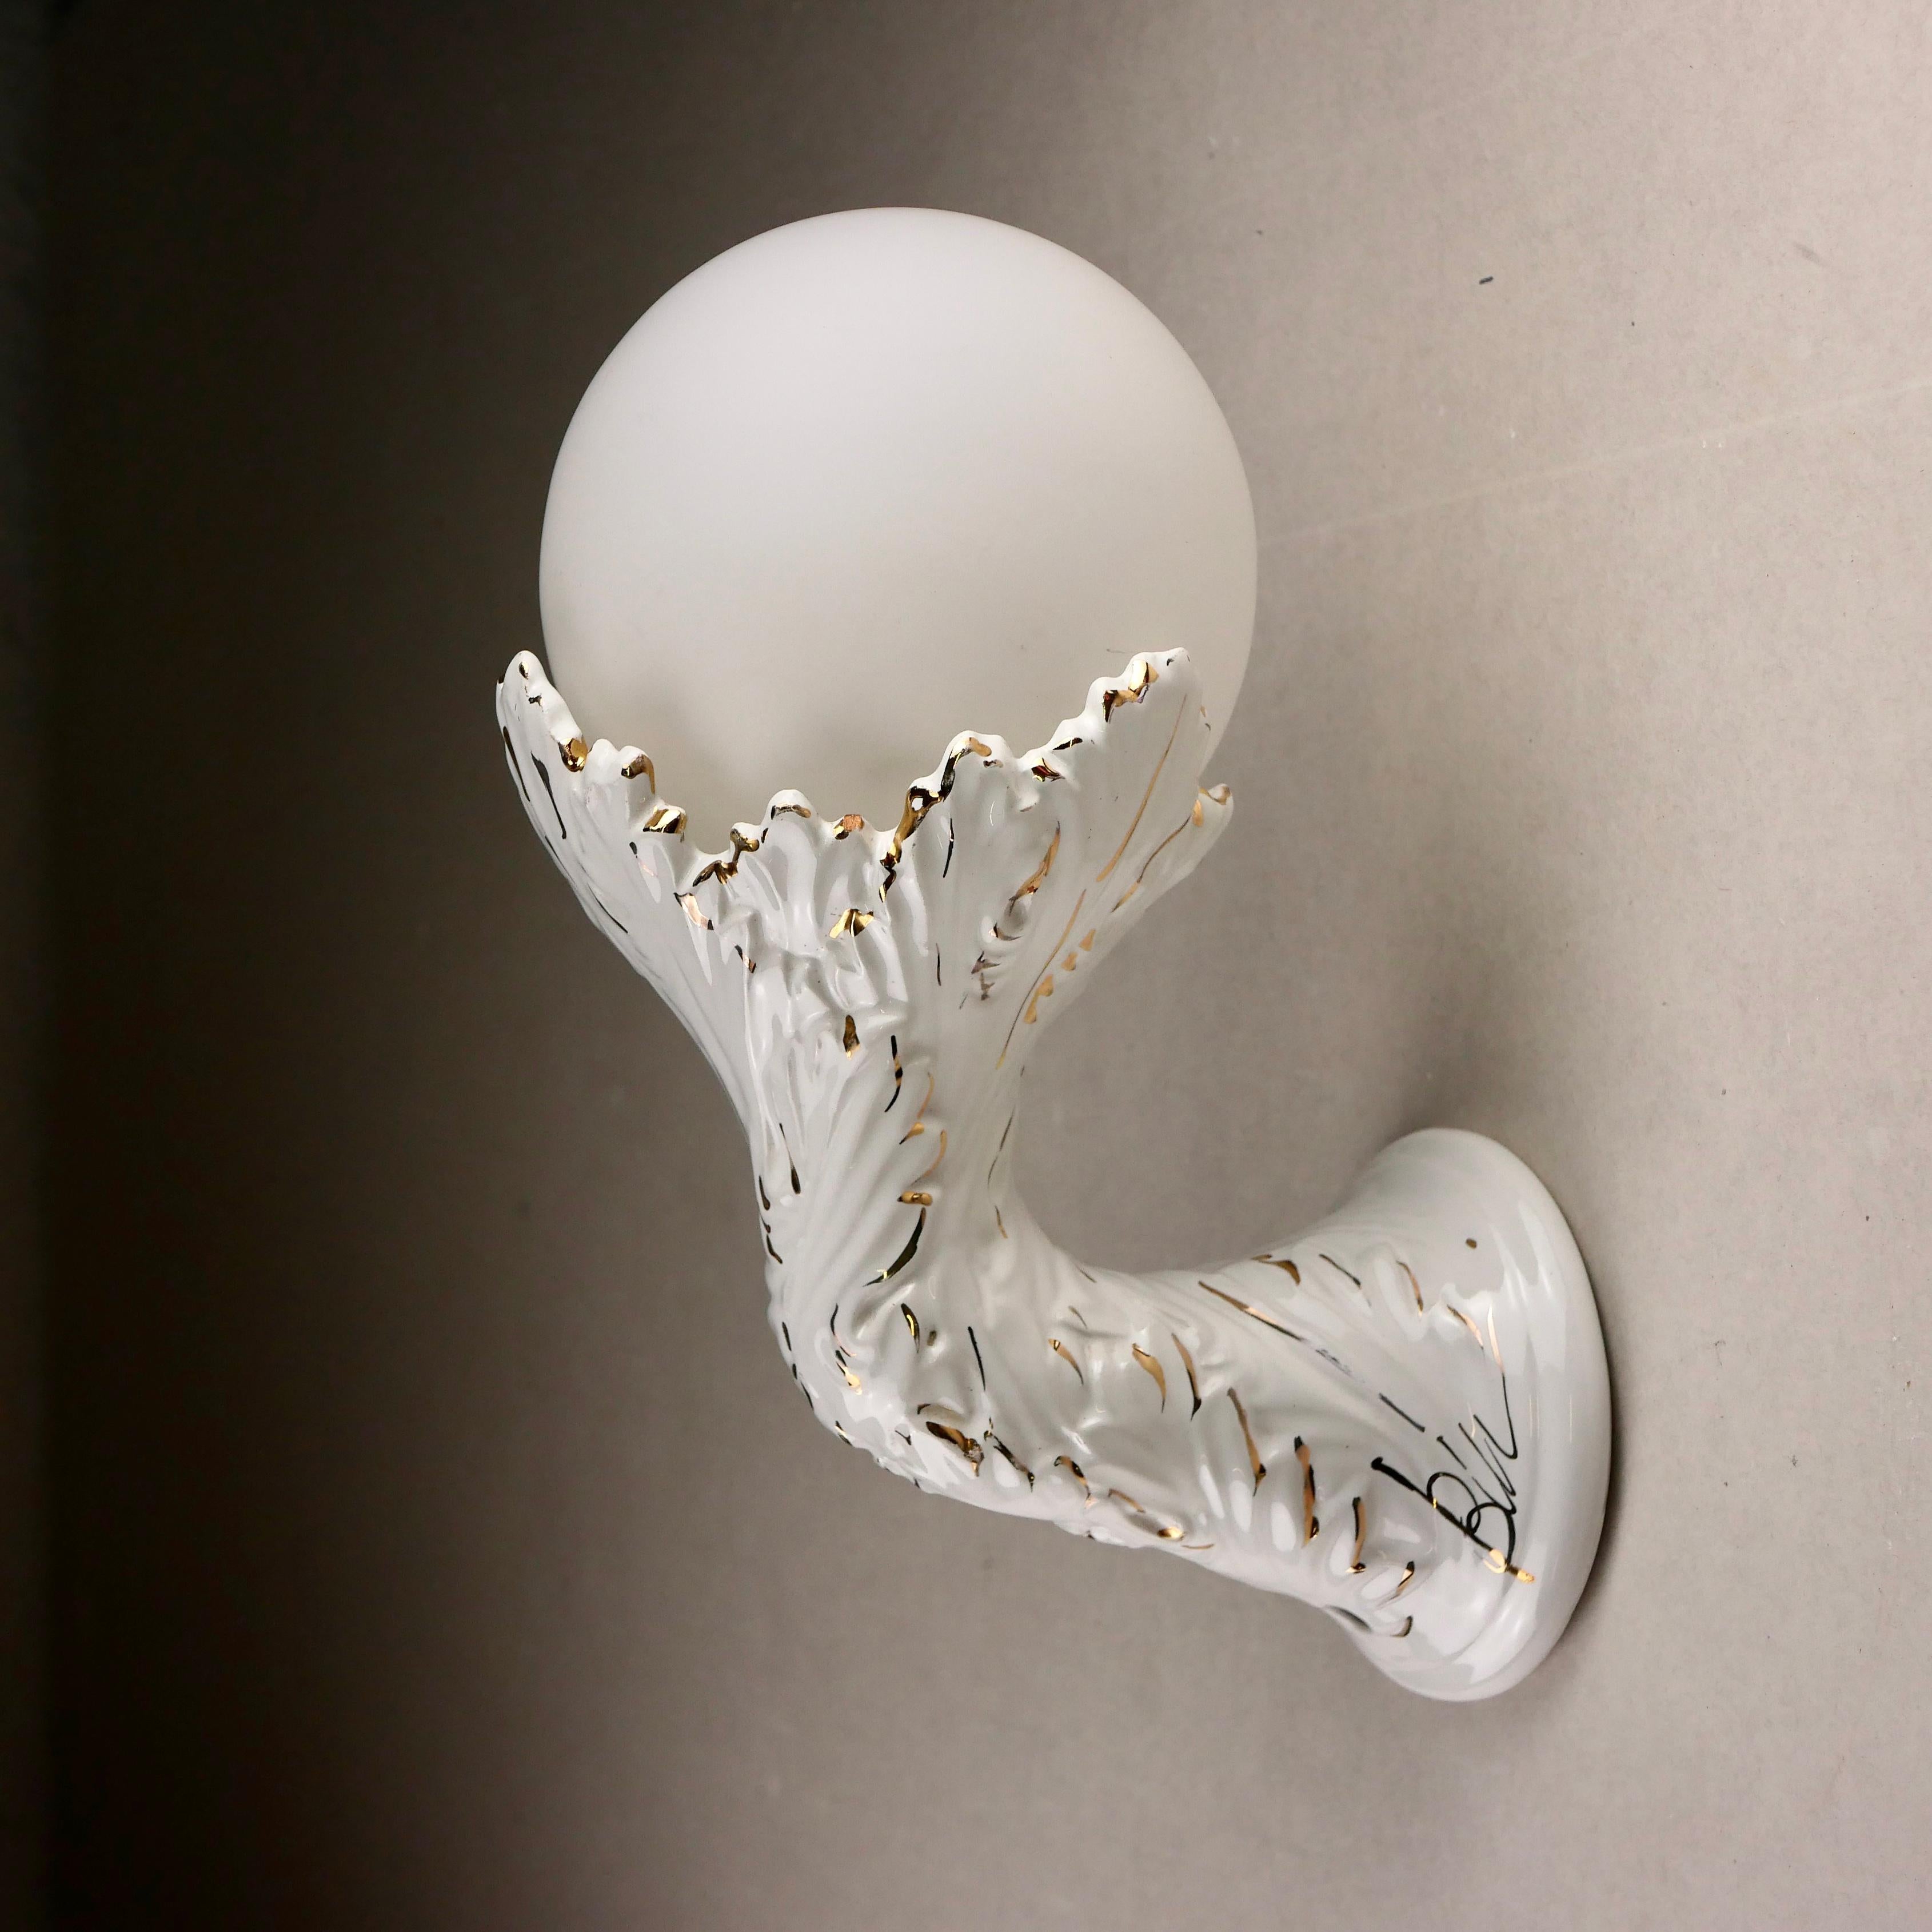 Beautiful sconce in porcelain, with gilded decorations and a frozen glass sphere. Organic and Art Deco styles, from the Netherlands, 1950s.
Minor losses (see photos), but barely visible.
Bulb included.